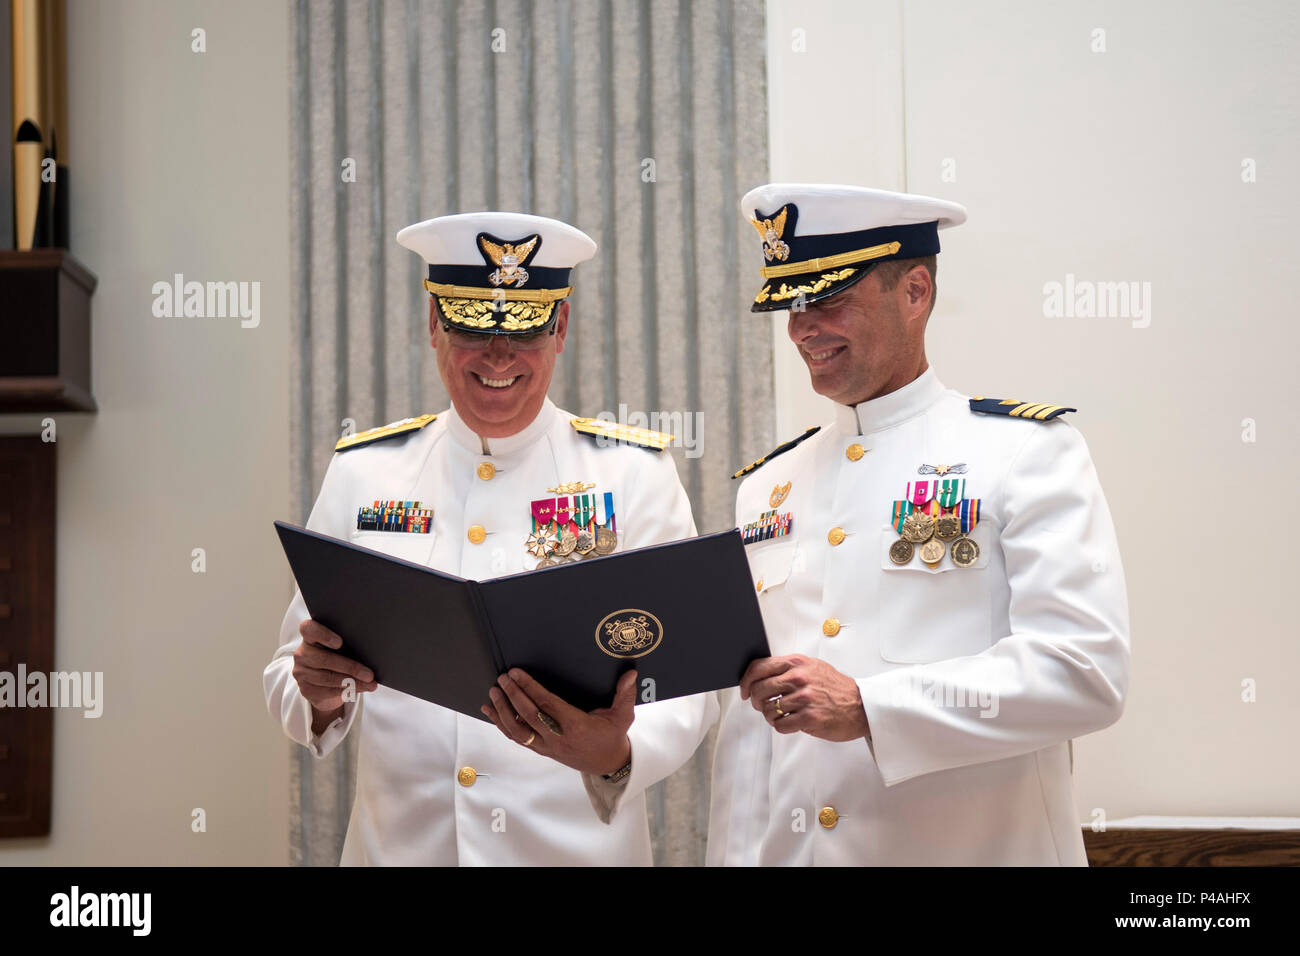 Rear Adm. Scott A. Buschman, commander of the Coast Guard 7th District, left, presents Cmdr. Kevin Jones, commanding officer of the Coast Guard Maritime Force Protection Unit Kings Bay, with an award during the unit's change of command ceremony at Naval Submarine Base Kings Bay, Georgia, June 24, 2016. At the ceremony, Cmdr. Jones transferred command of the unit to Cmdr. Joseph Gaskill. U.S. Navy photo by Petty Officer 2nd Class Bradley Gee Stock Photo